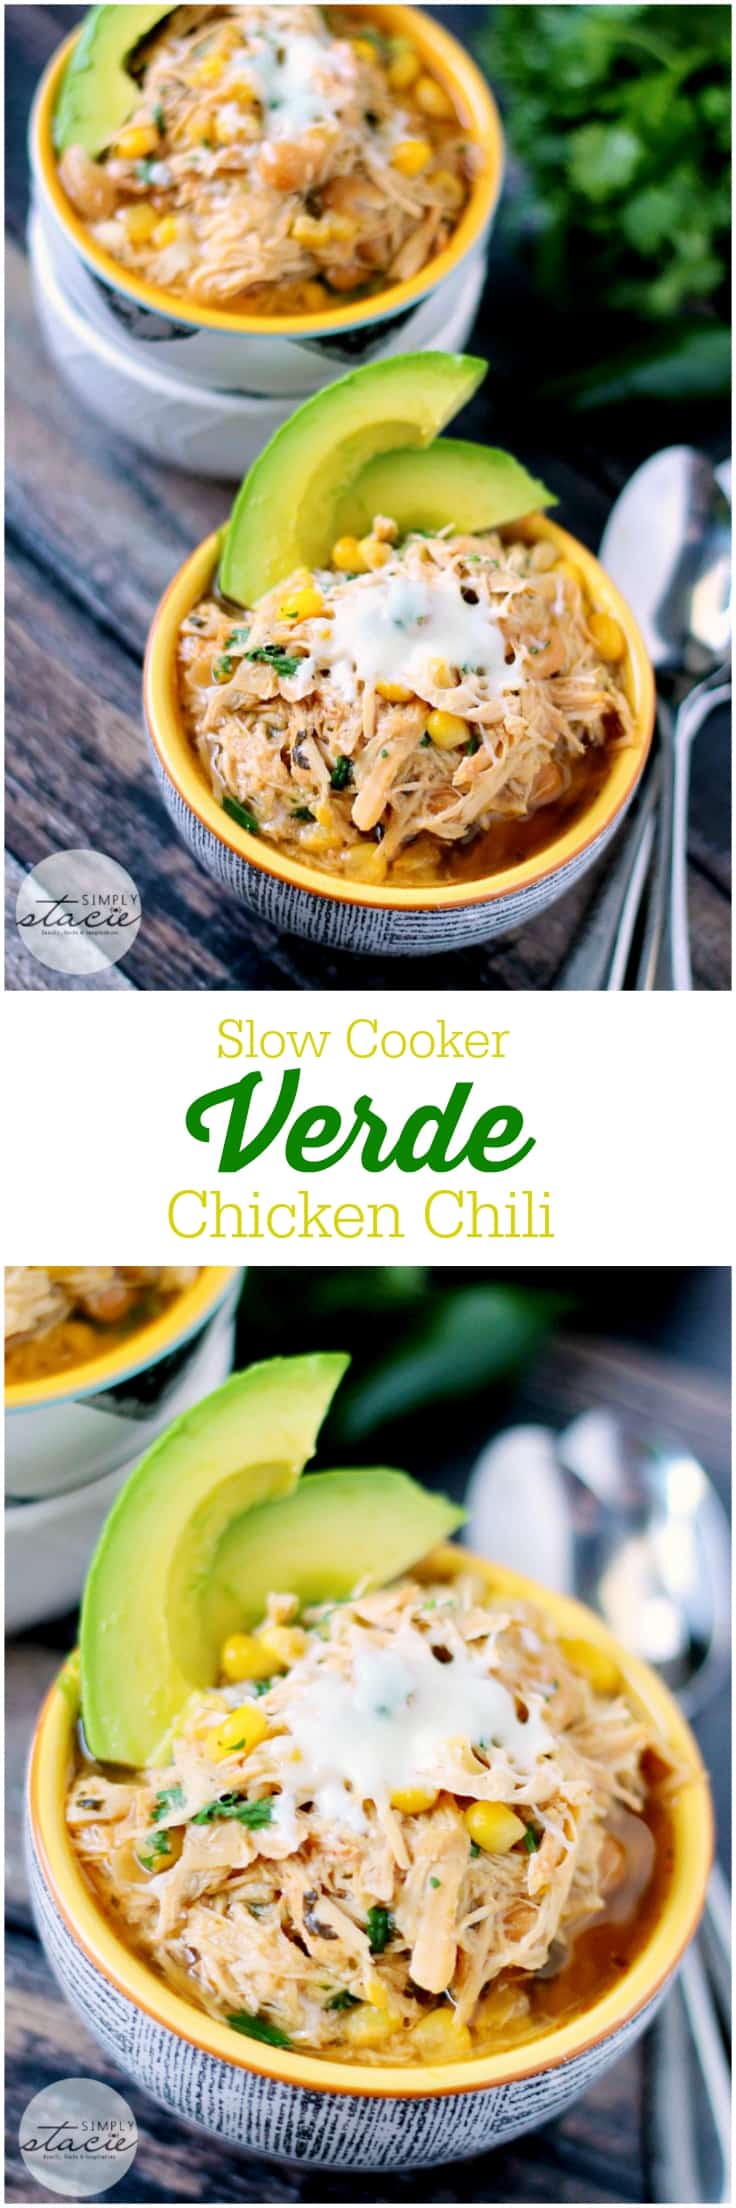 Slow Cooker Verde Chicken Chili Recipe - The best white chili recipe ever! Let the corn, cannellini beans, jalapeño, and yummy chicken simmer all day in the Crockpot for a perfect busy weeknight meal.